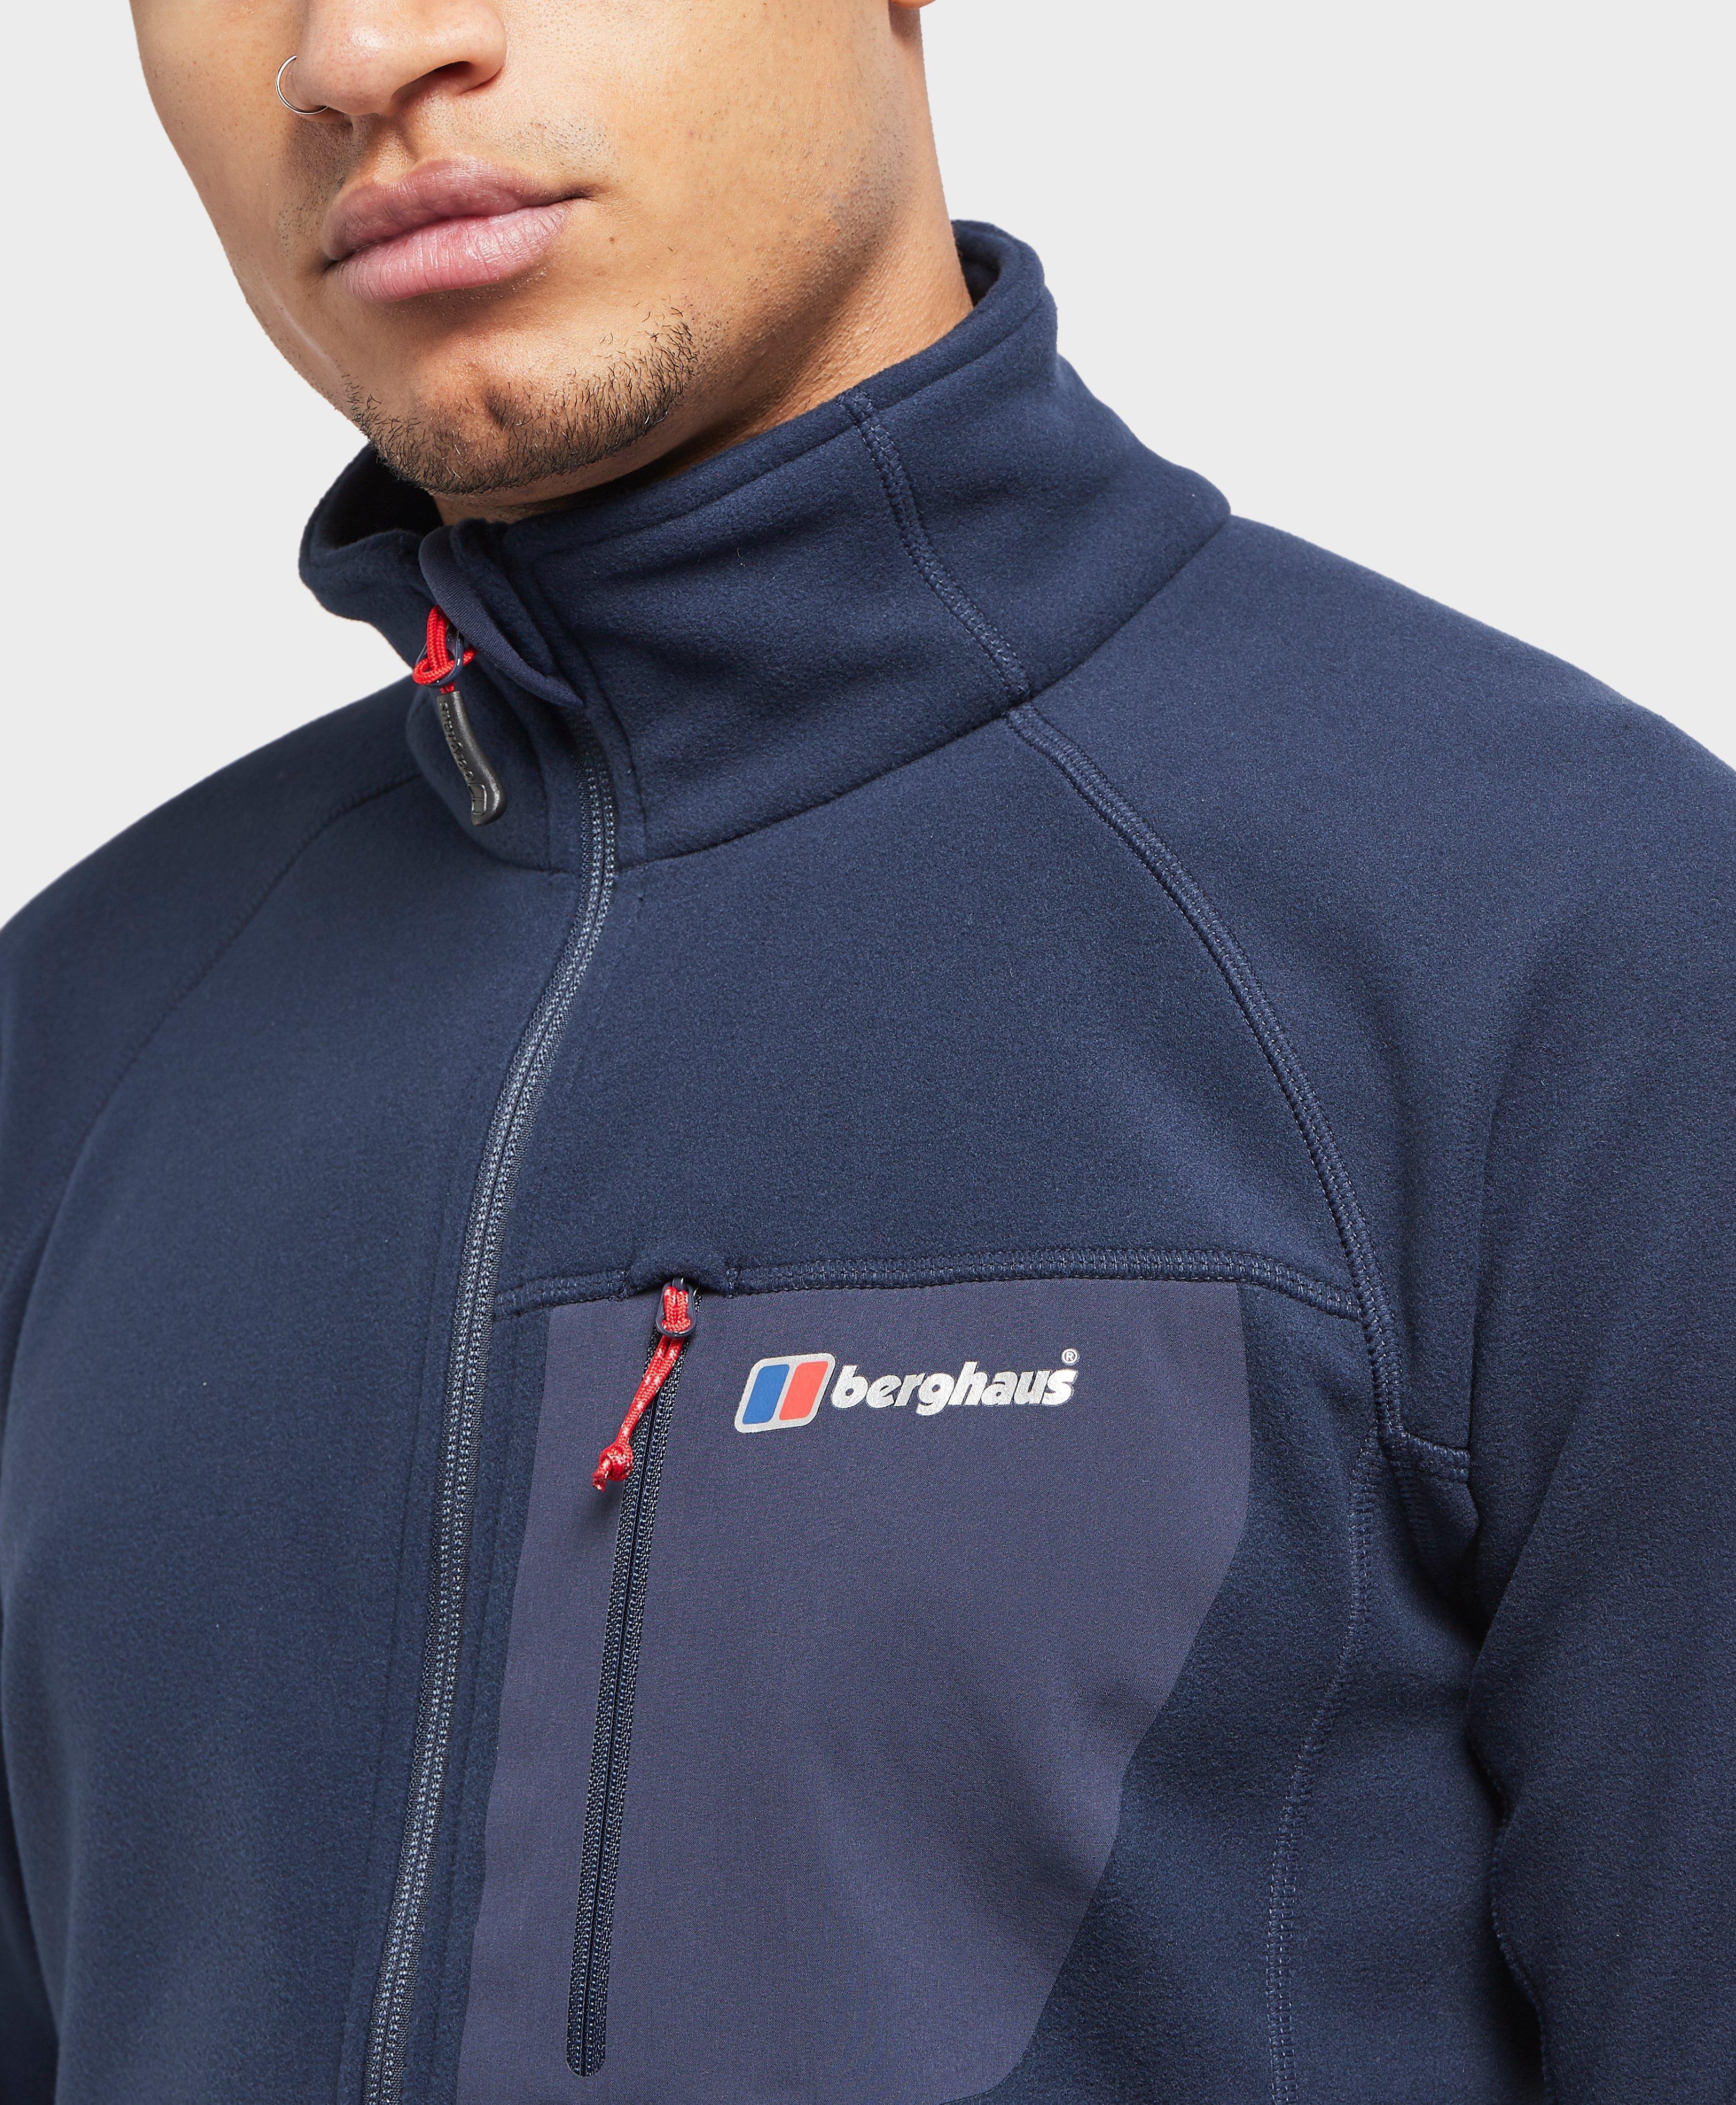 Purchase > berghaus deception fleece, Up to 70% OFF